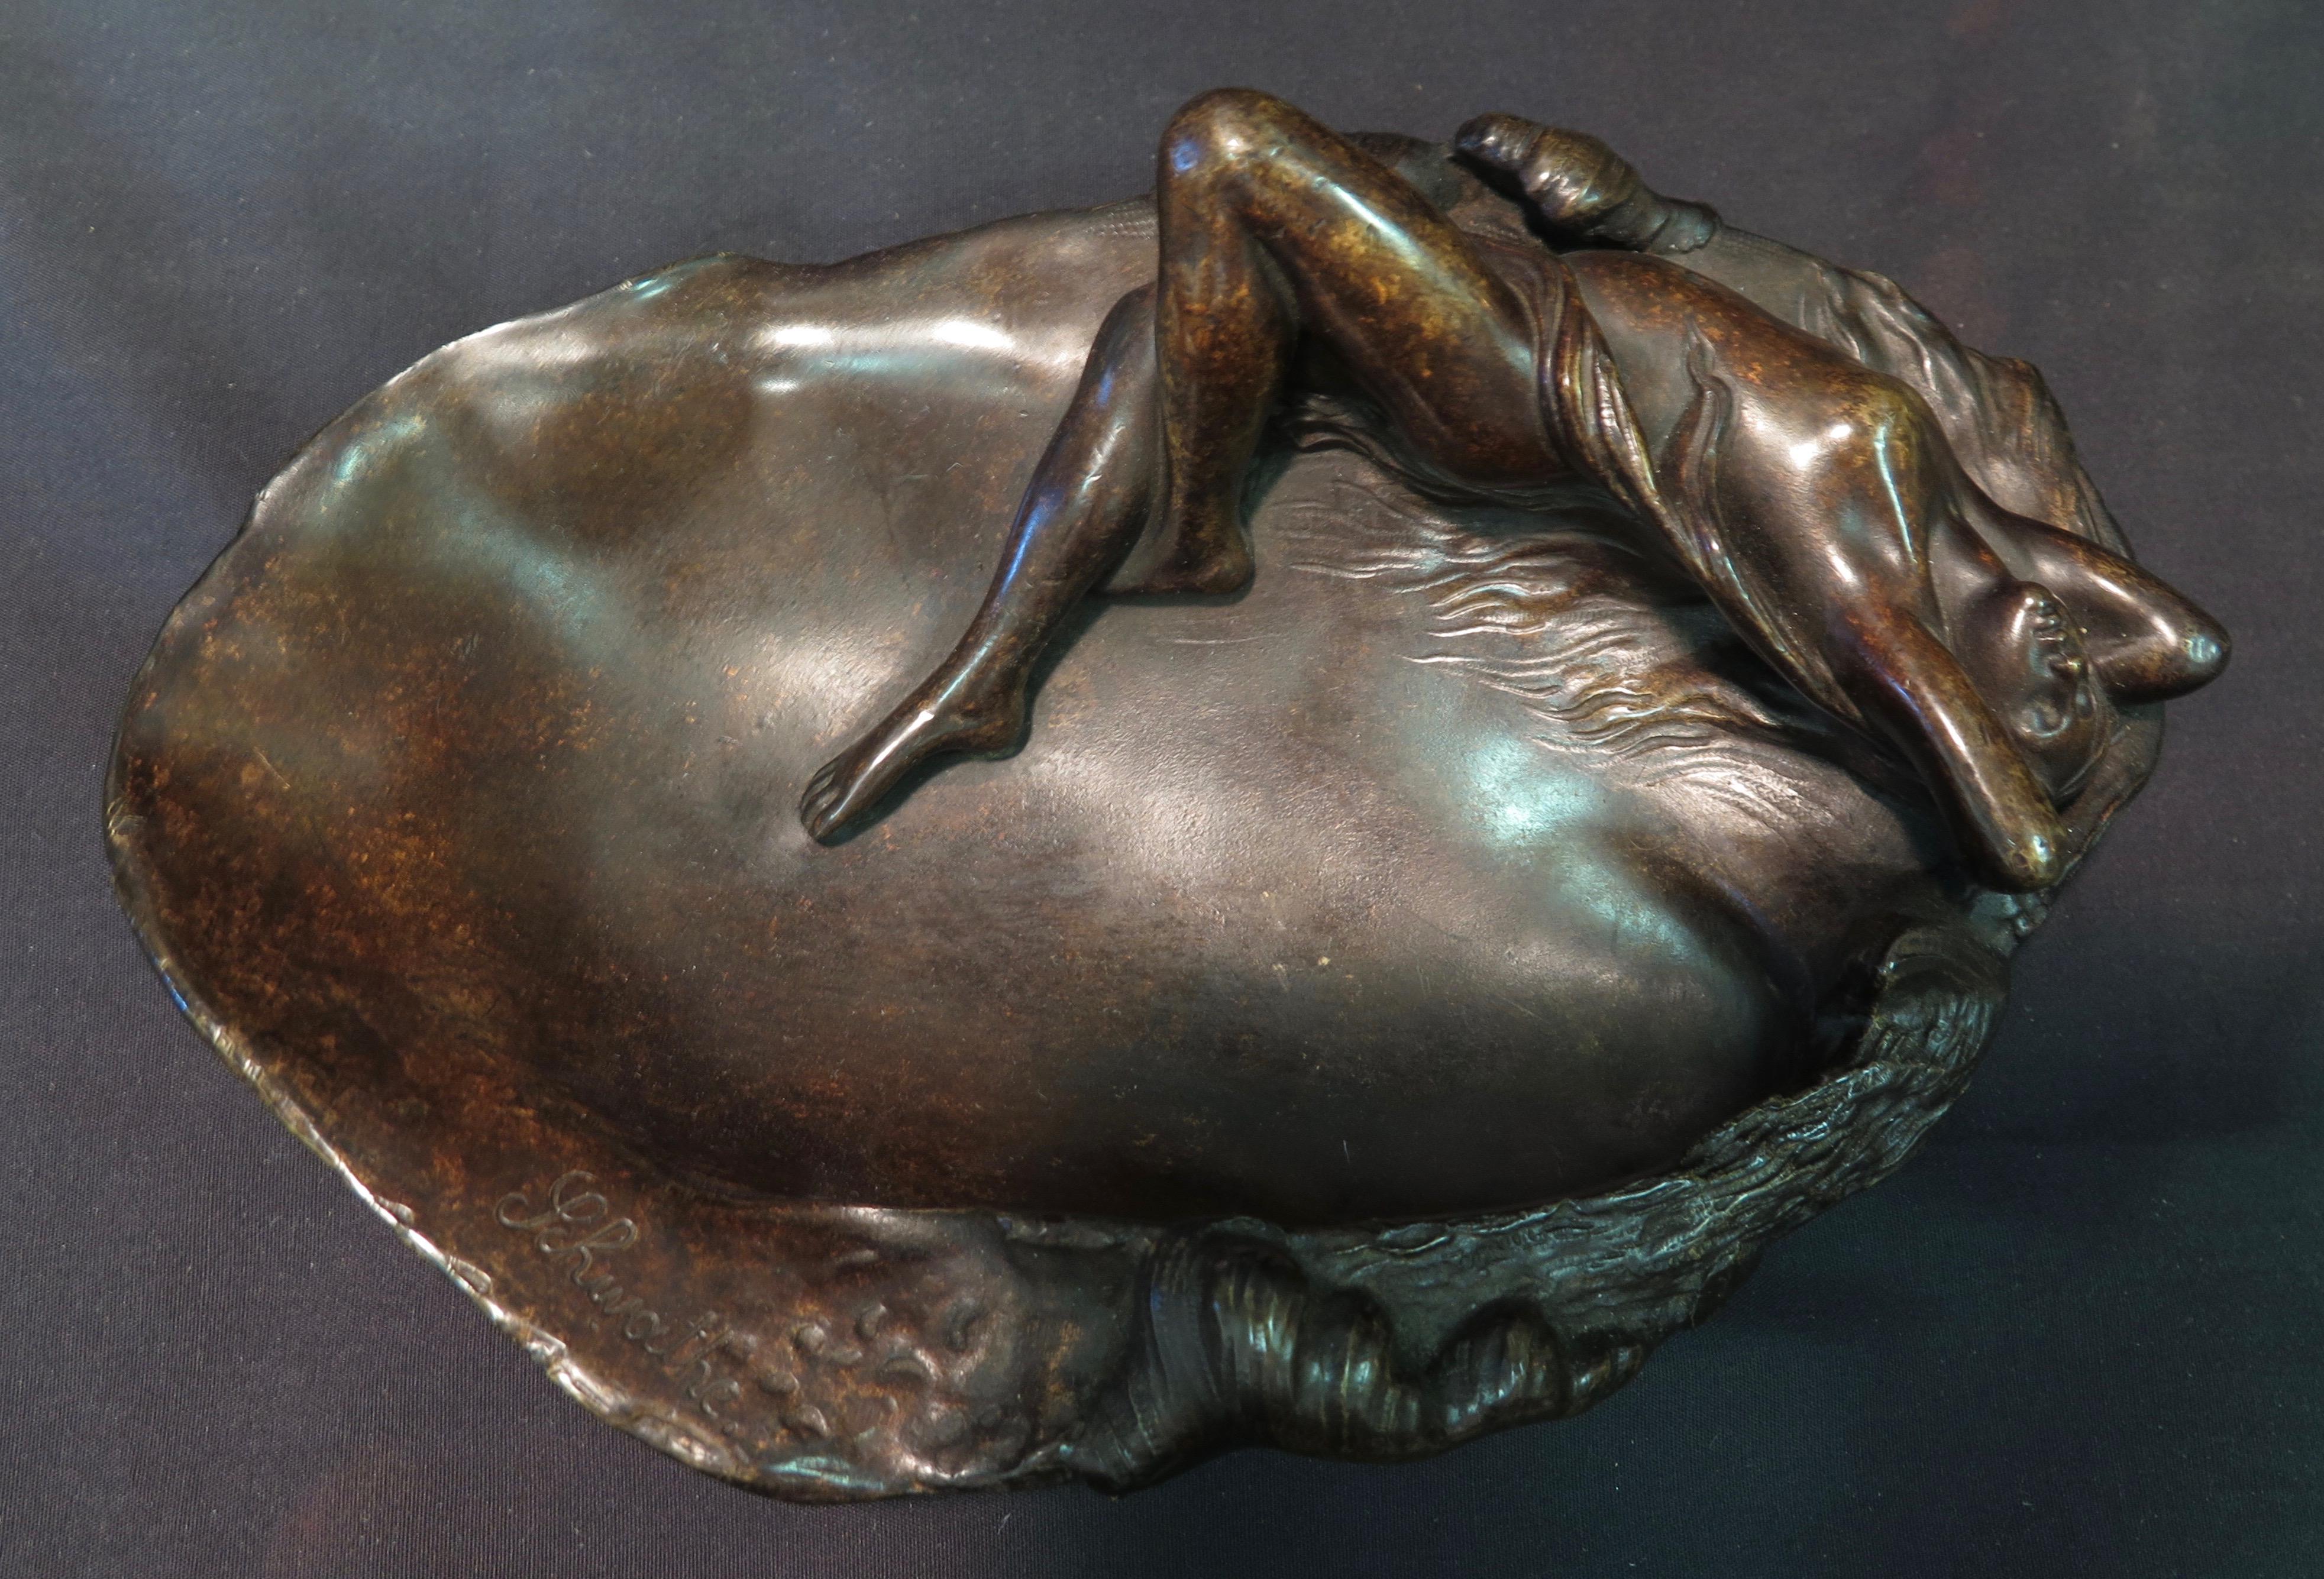 This early 20th century Art Nouveau period bronze vanity tray features a beautifully sculpted nude water nymph sunbathing along the water's edge. She is positioned in a seductive pose, seemingly raptured by the oncoming waves. The bronze, in dark